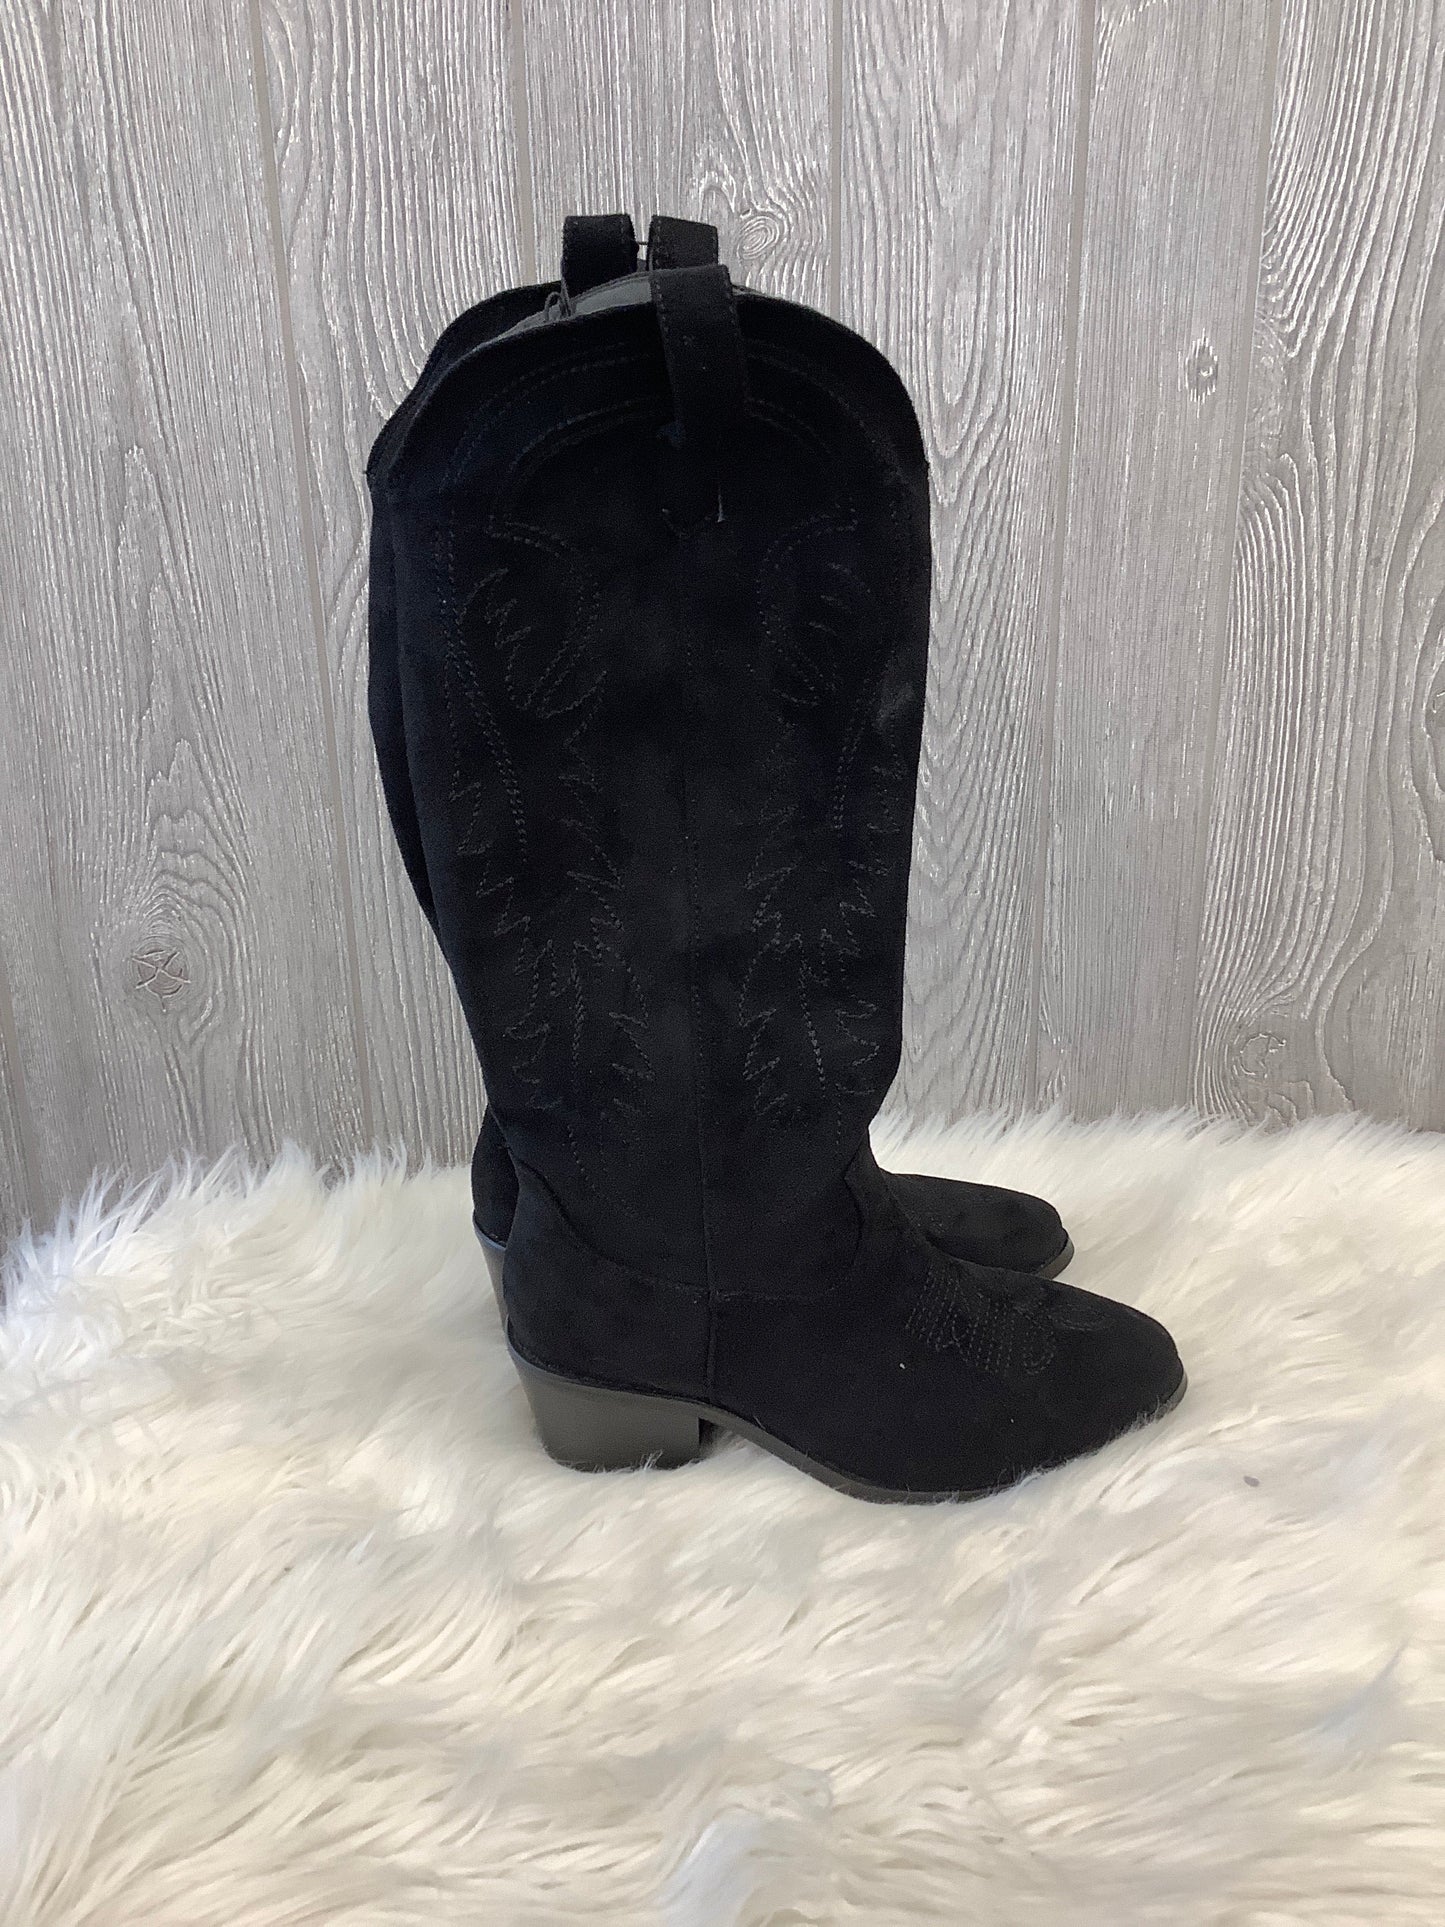 Black Boots Western Clothes Mentor, Size 6